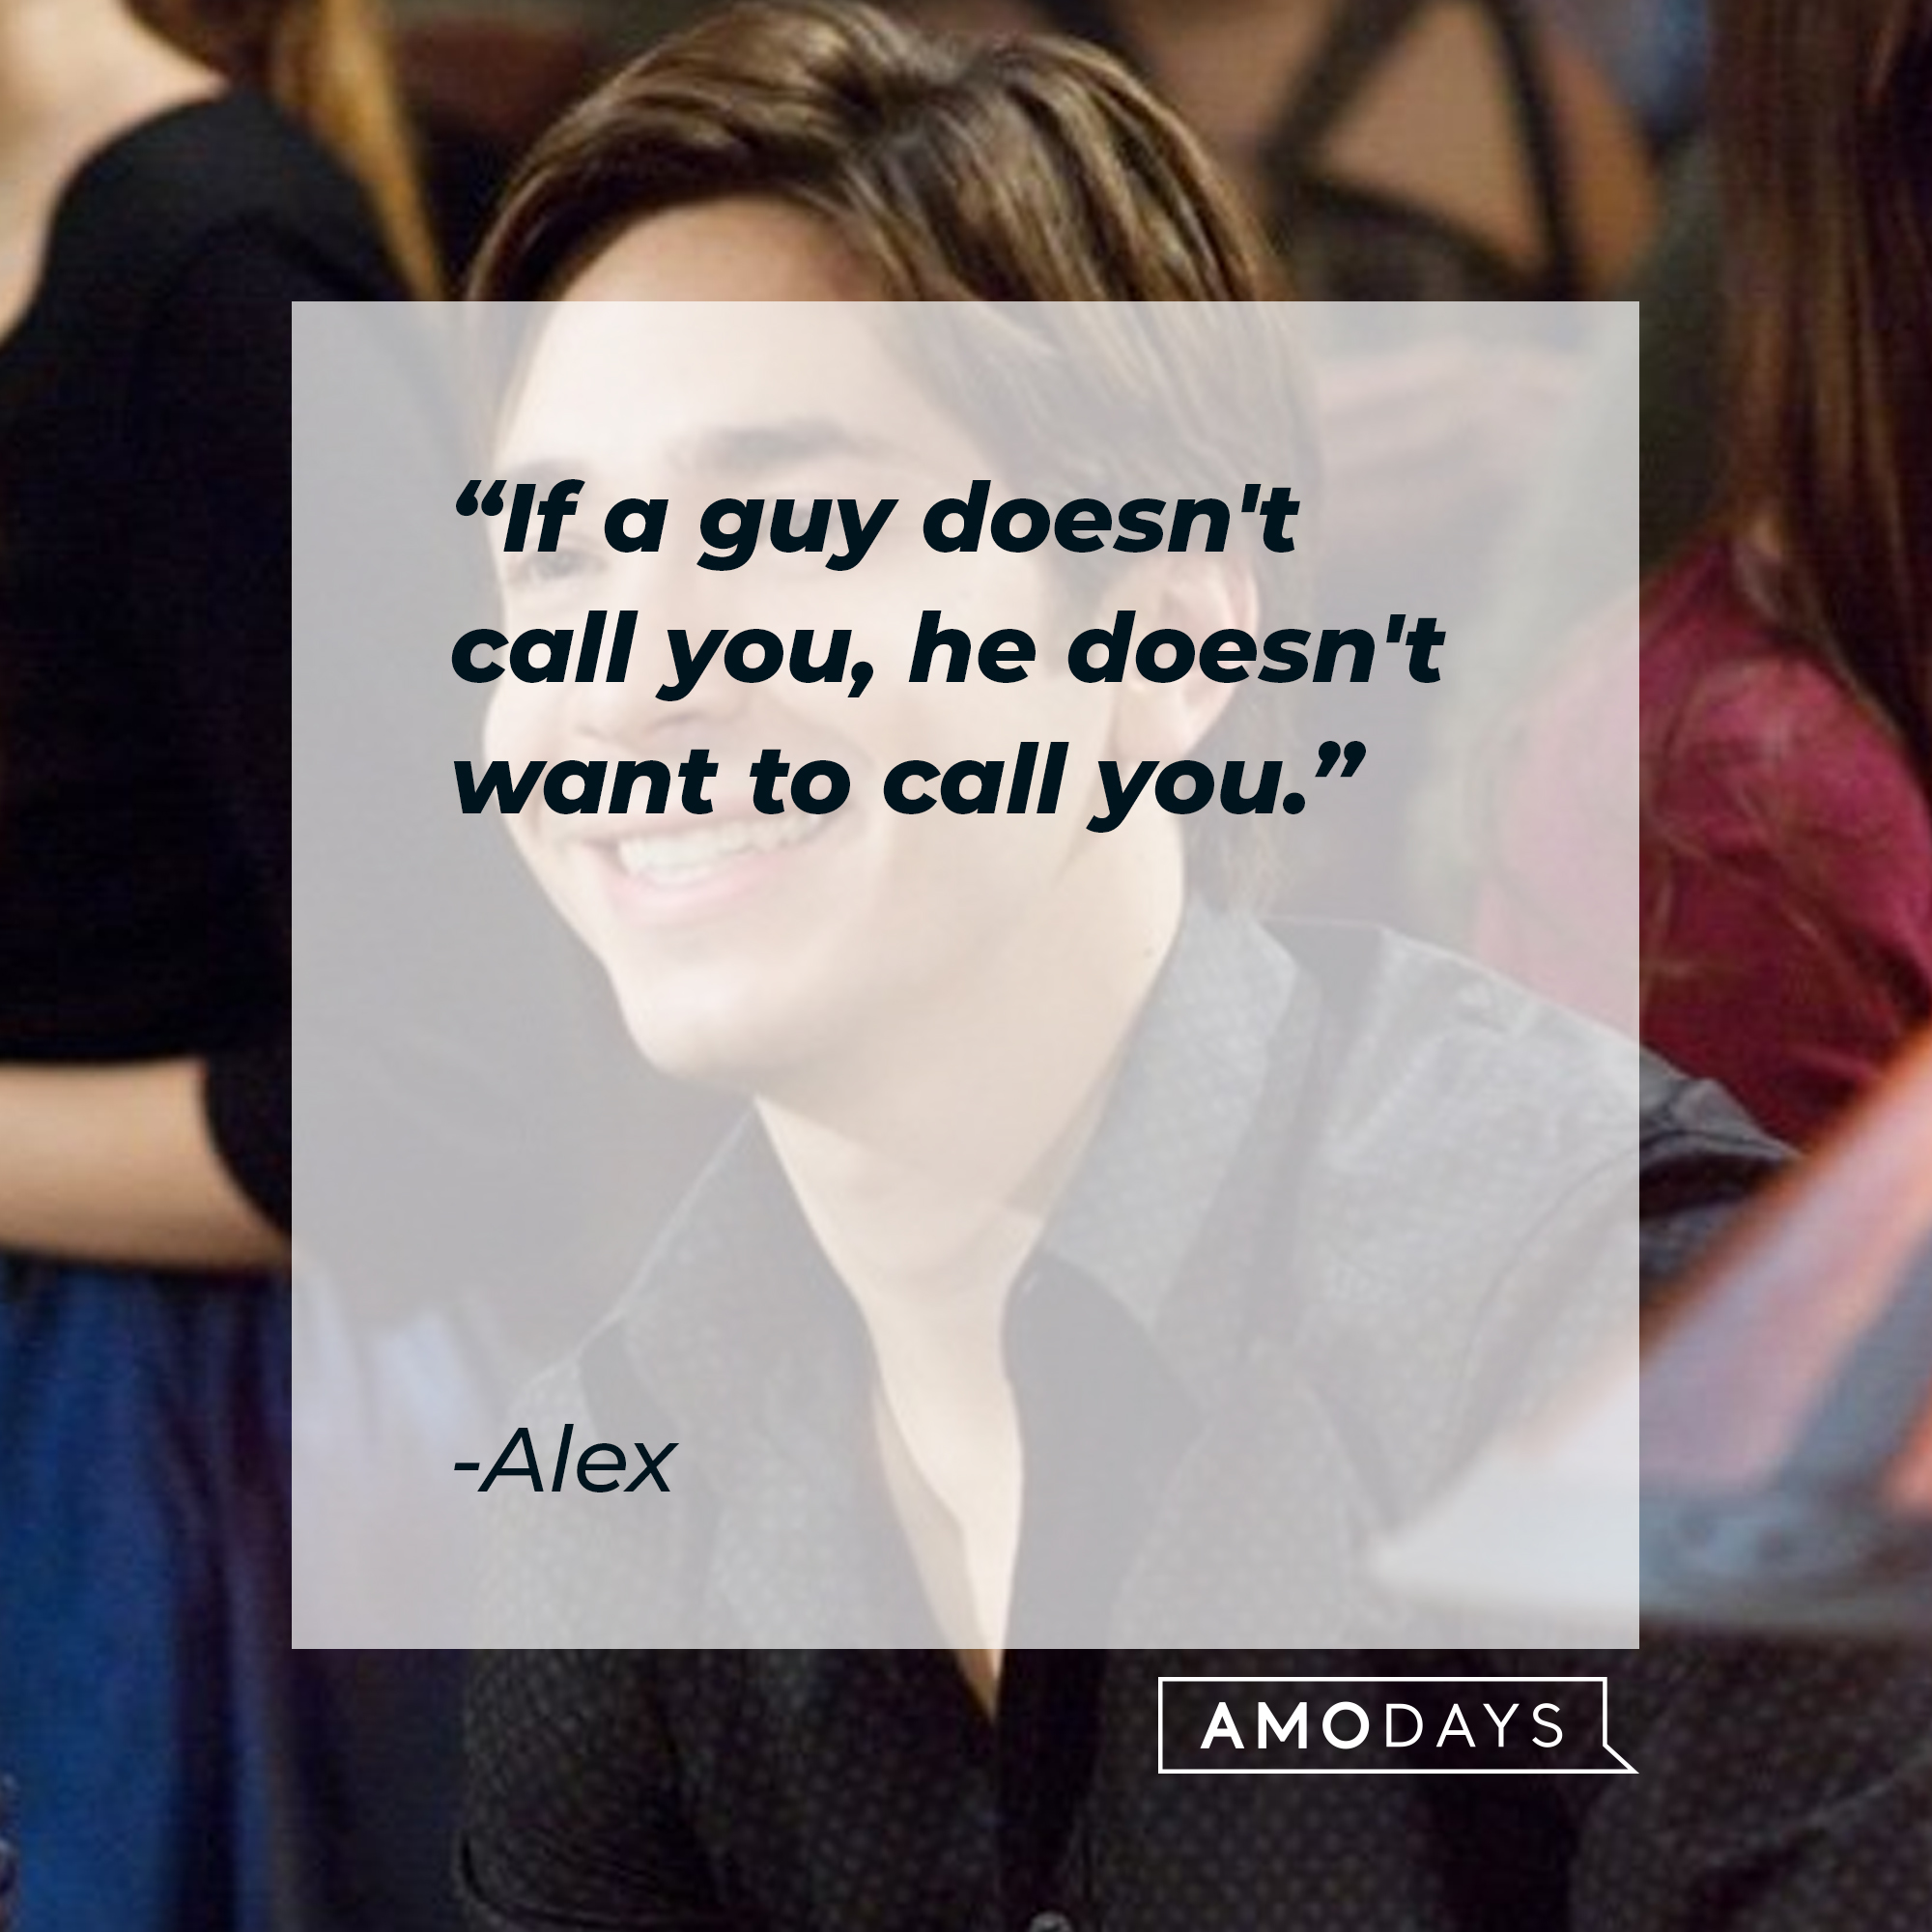 Alex's quote: "If a guy doesn't call you, he doesn't want to call you." | Source: Facebook/hesjustnotthatintoyou